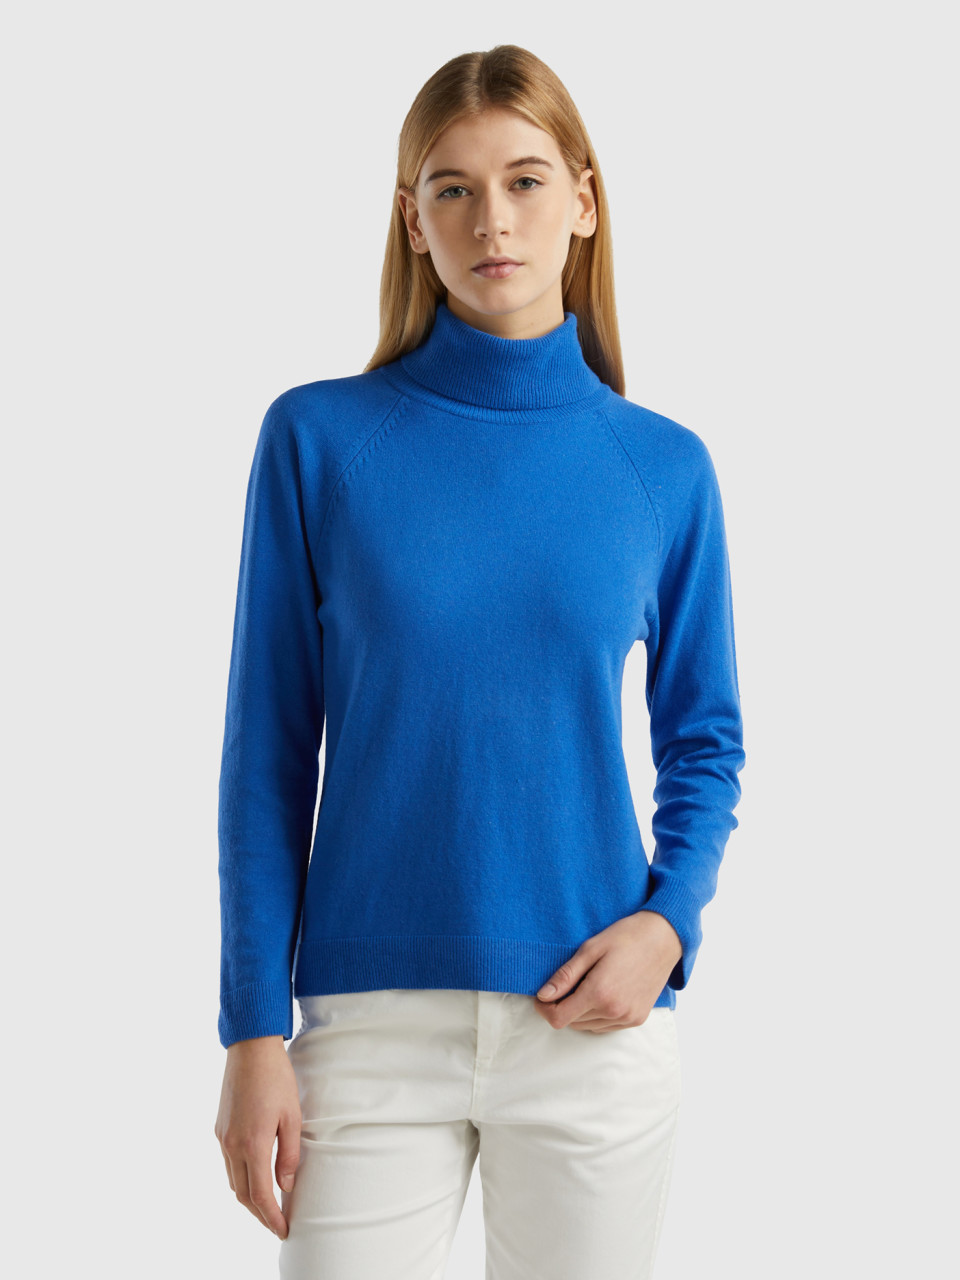 Benetton, Blue Turtleneck Sweater In Cashmere And Wool Blend, Blue, Women